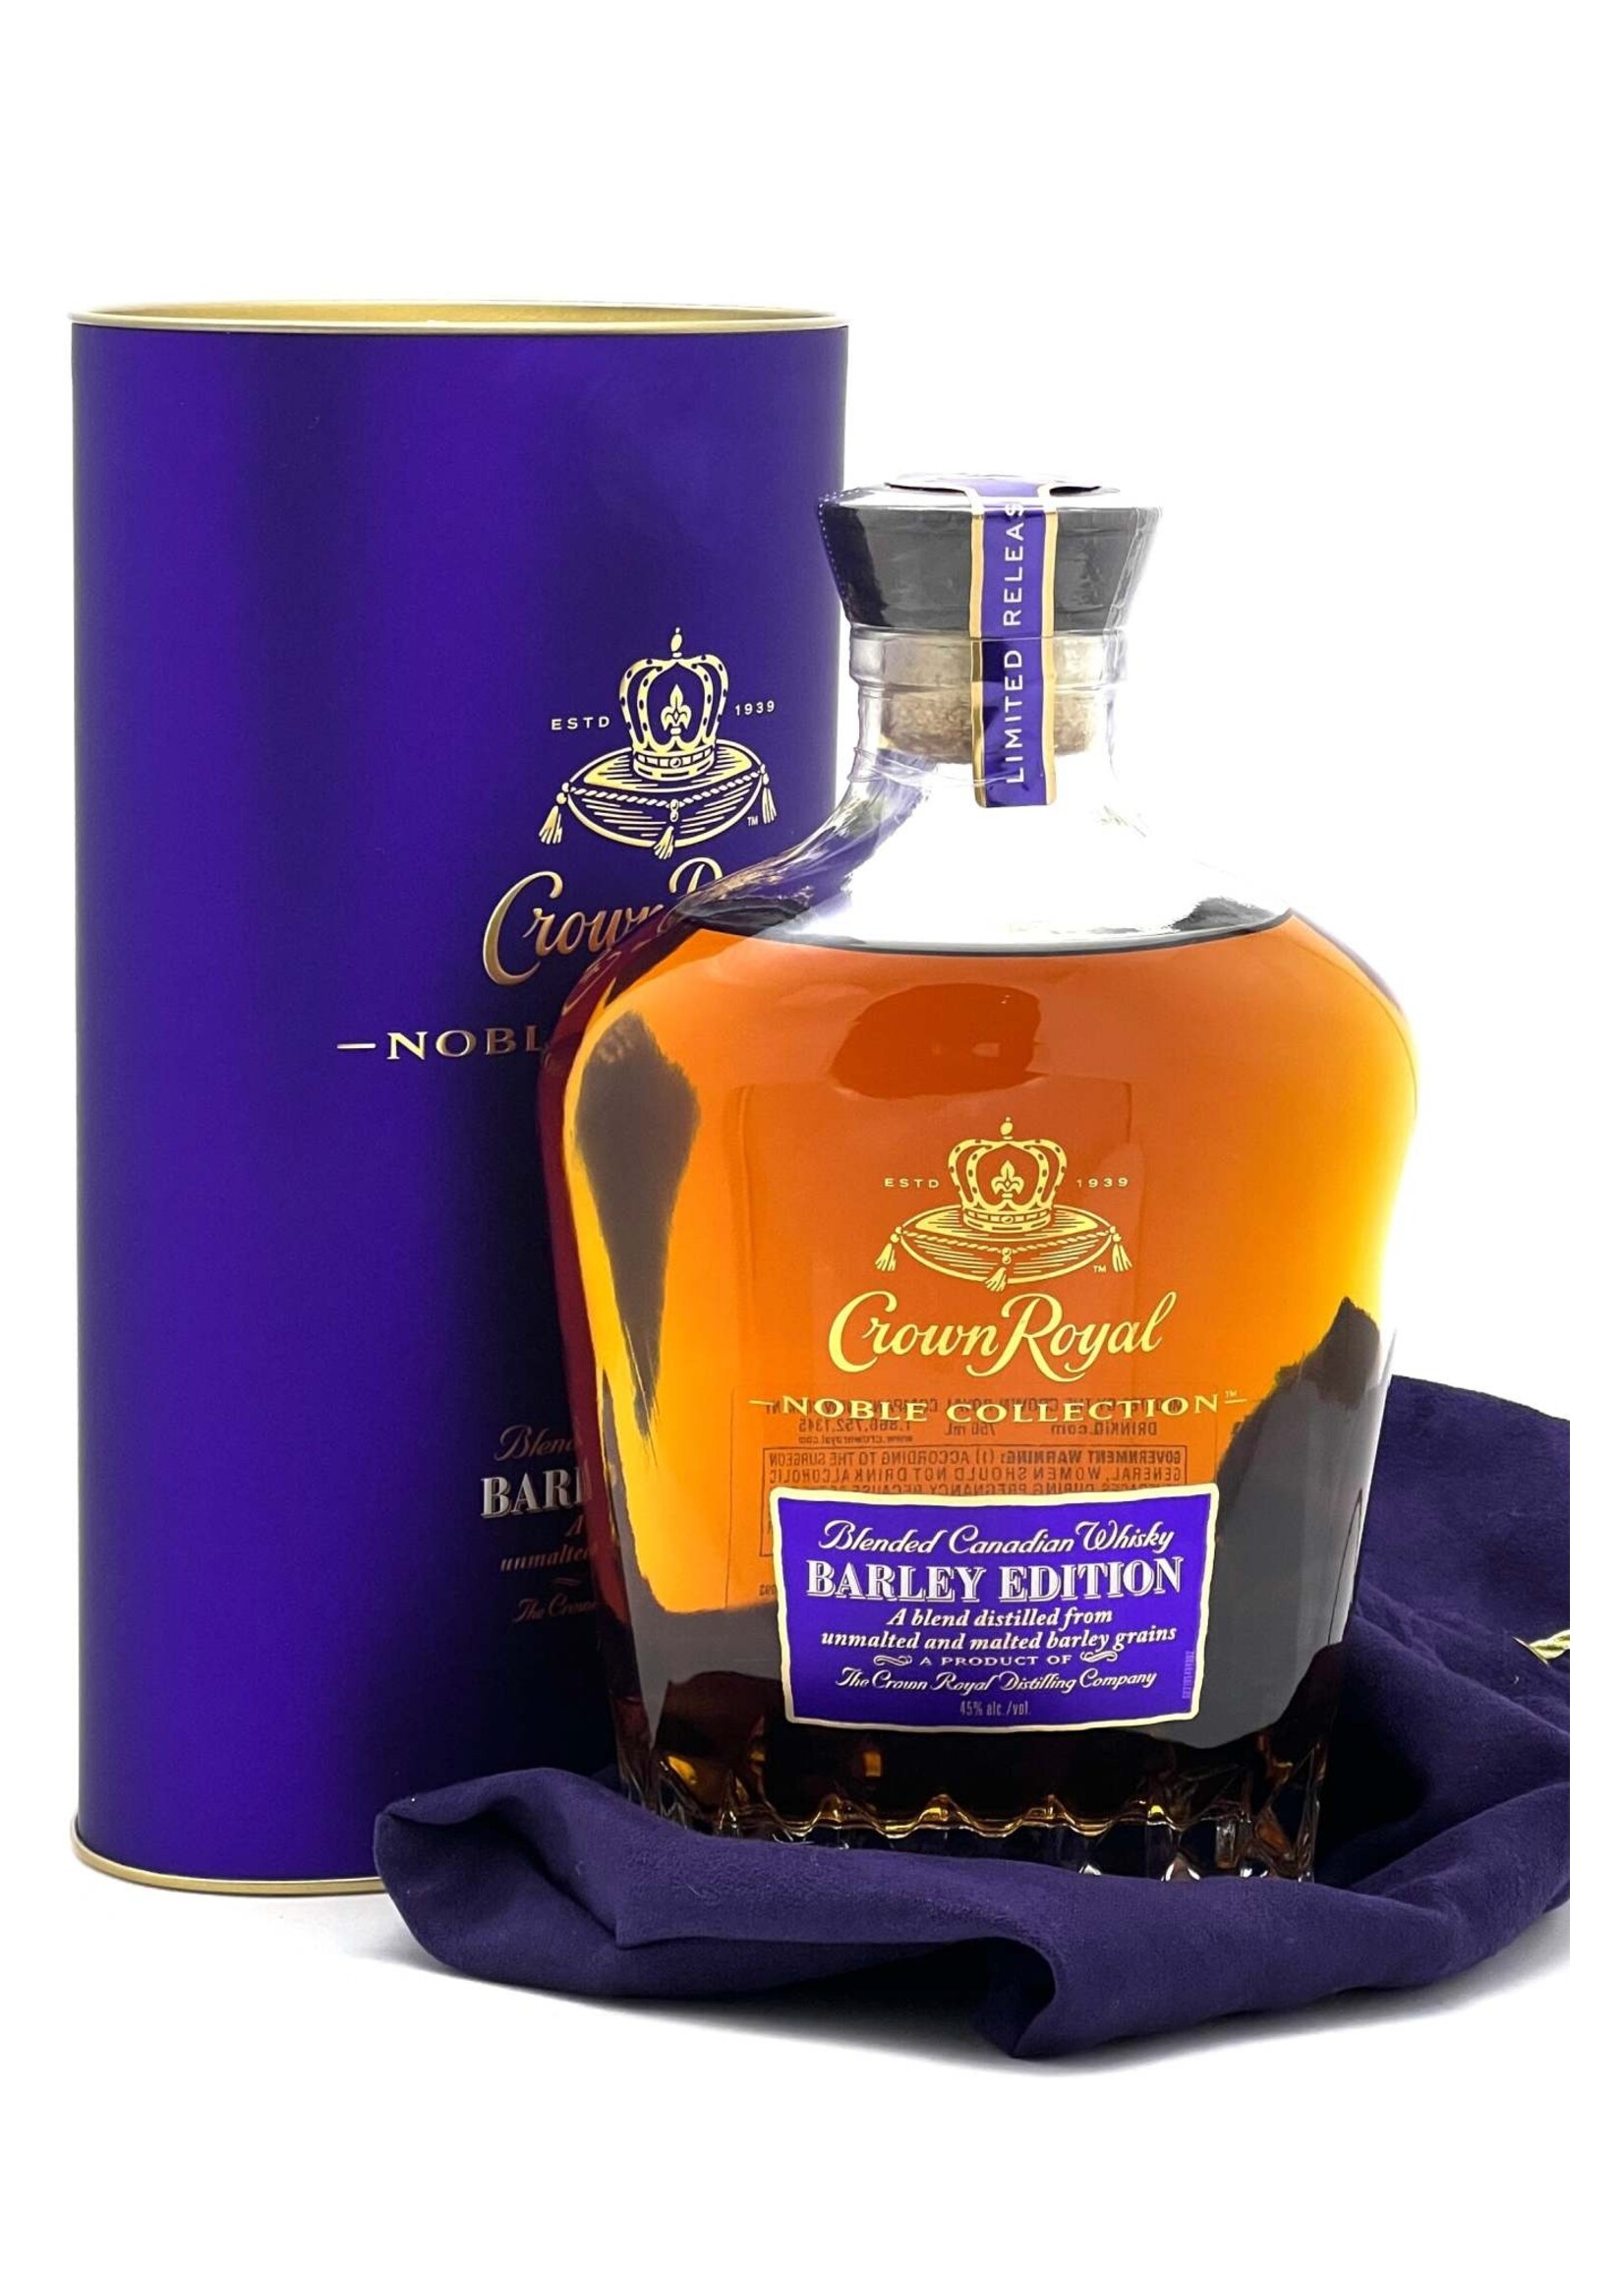 Crown Royal Canadian Whisky Barley Edition 90Proof 750ml